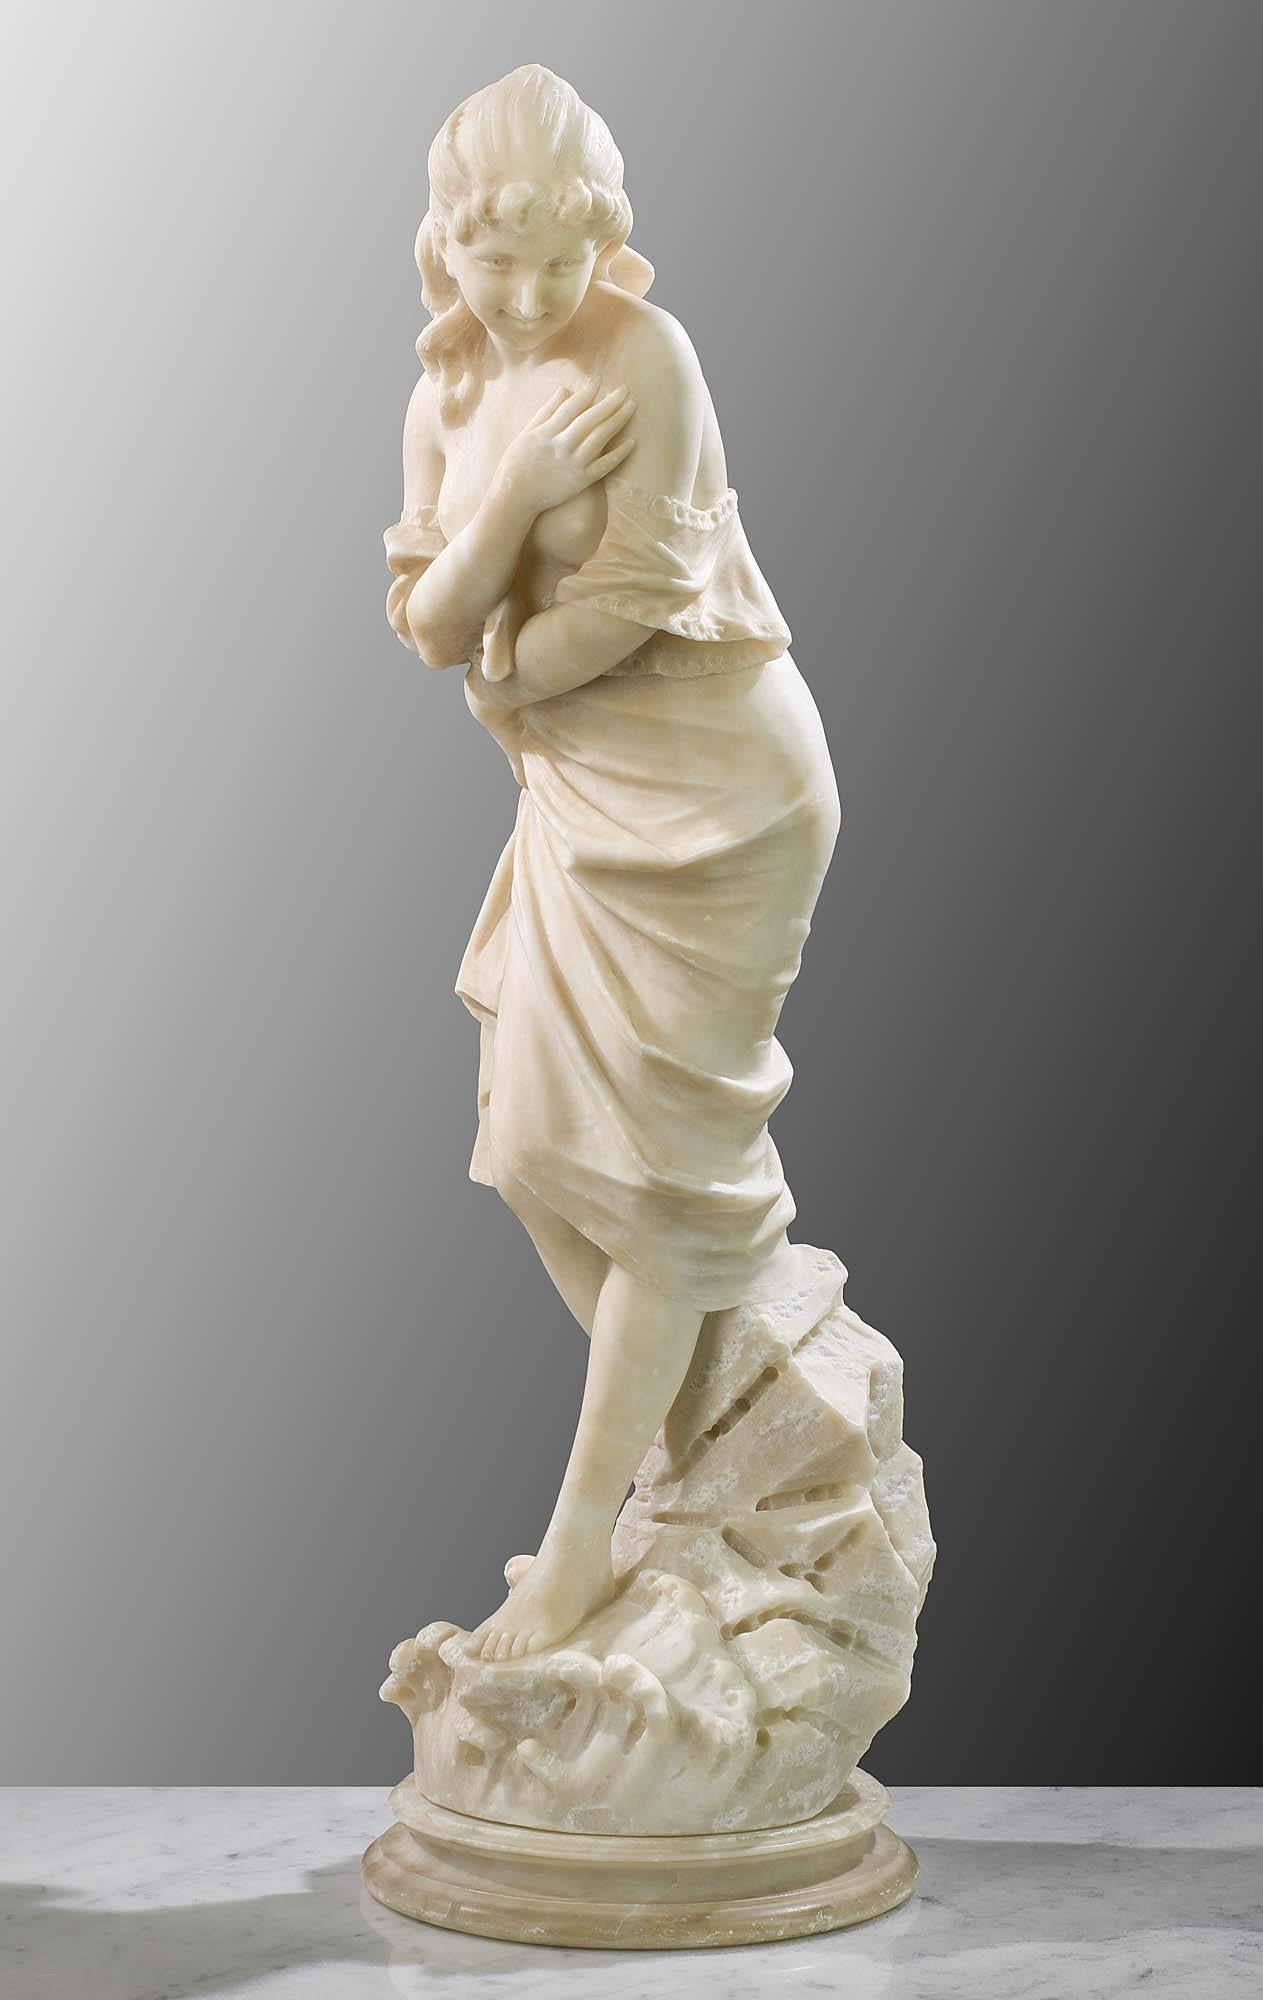 An antique Italian carved Alabaster figure of a young bather standing on a rusticated base of rocks, lapped by waves, and resting on a circular moulded plinth. Some minor scuffs and scratches,
Italian, late 19th century.
     